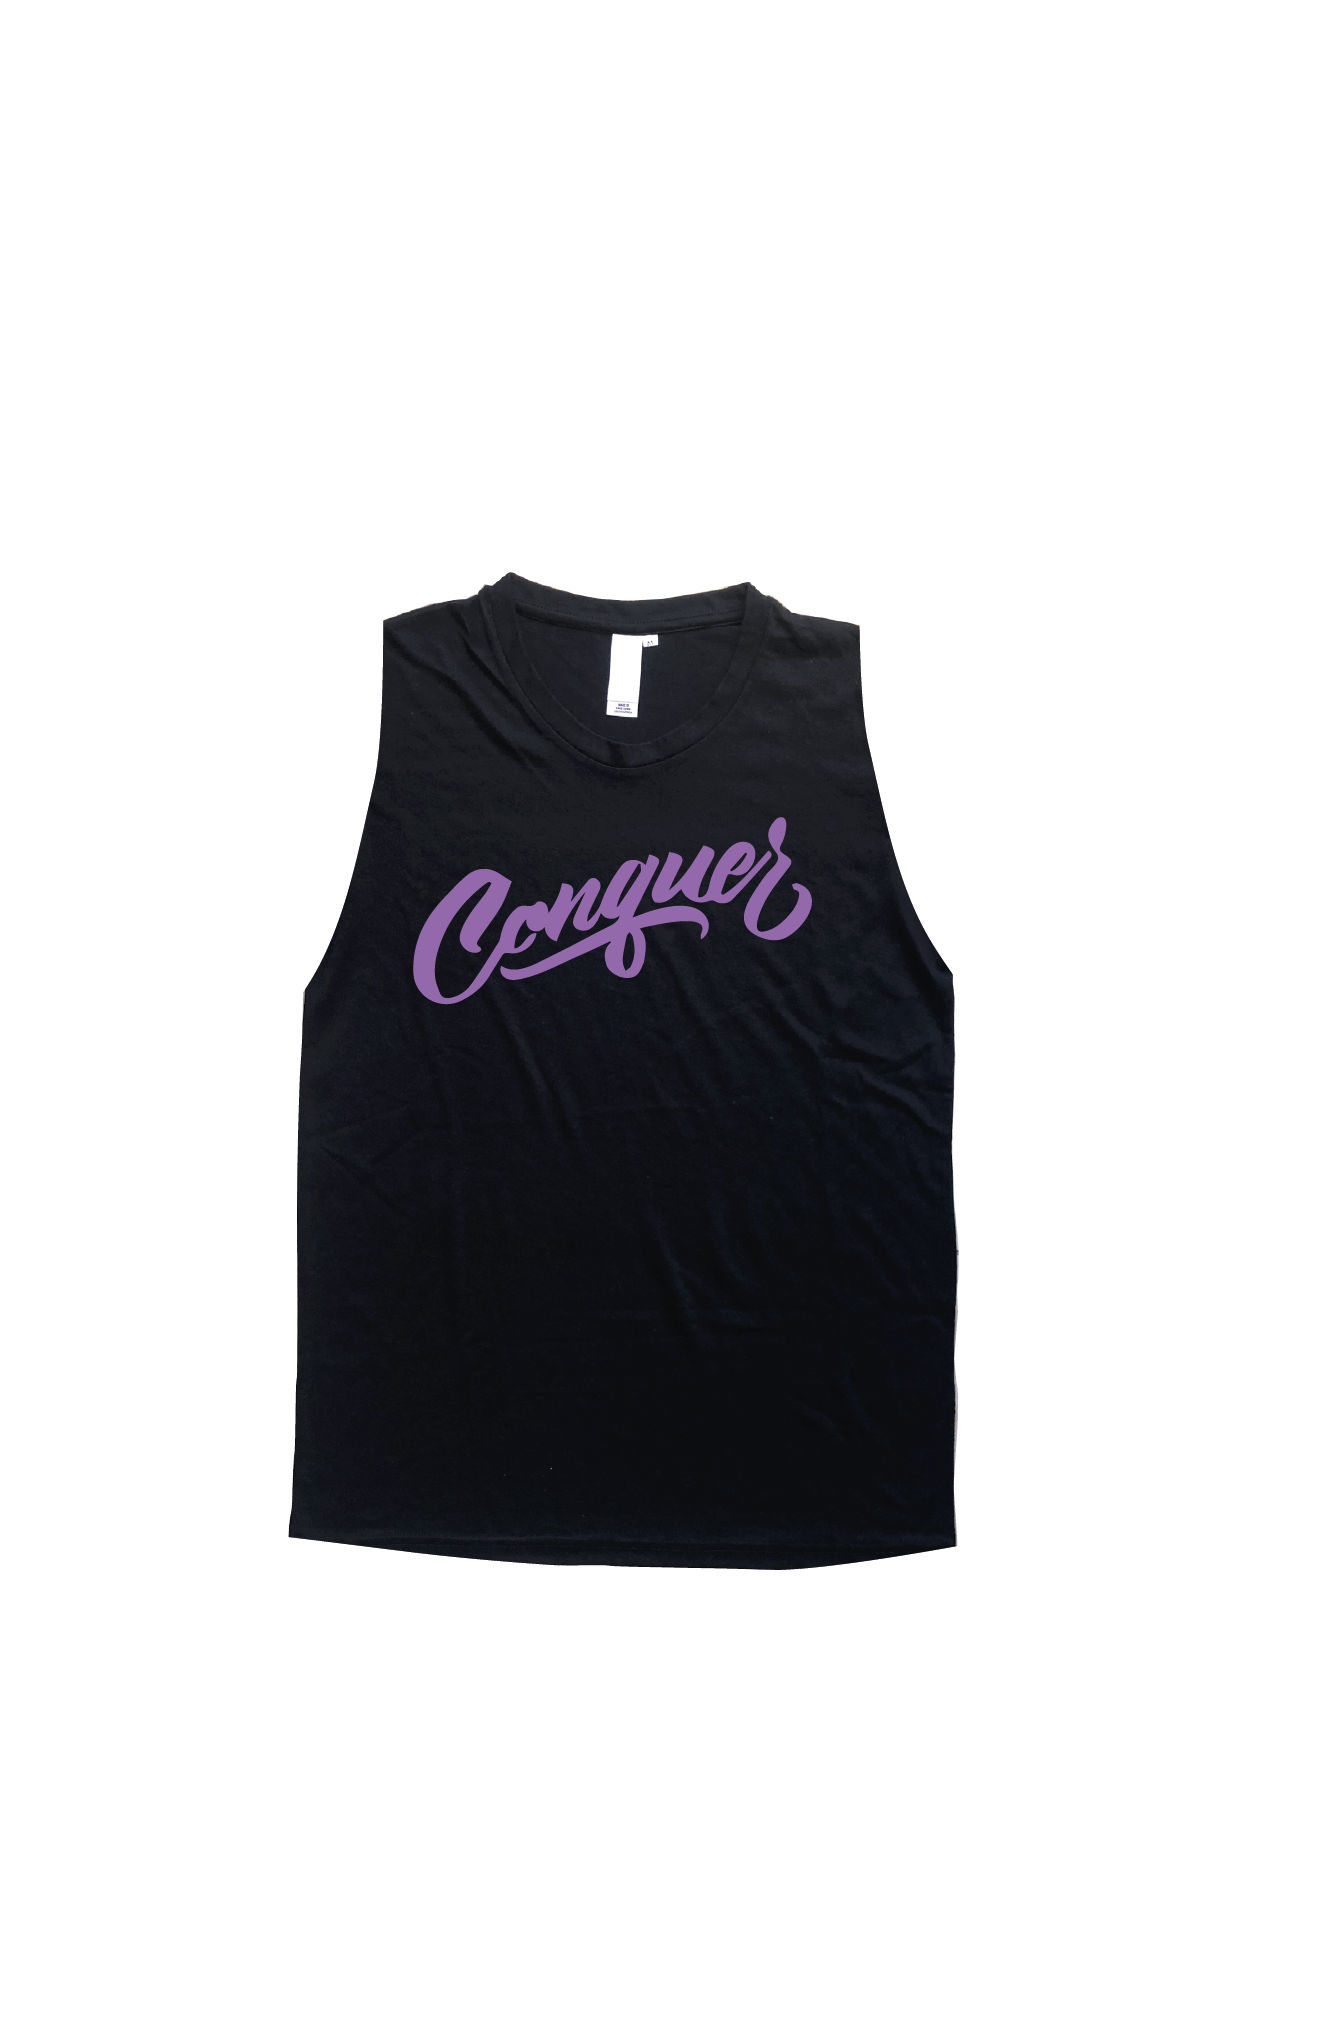 Black tank top with the word Conquer printed on the chest in lilac